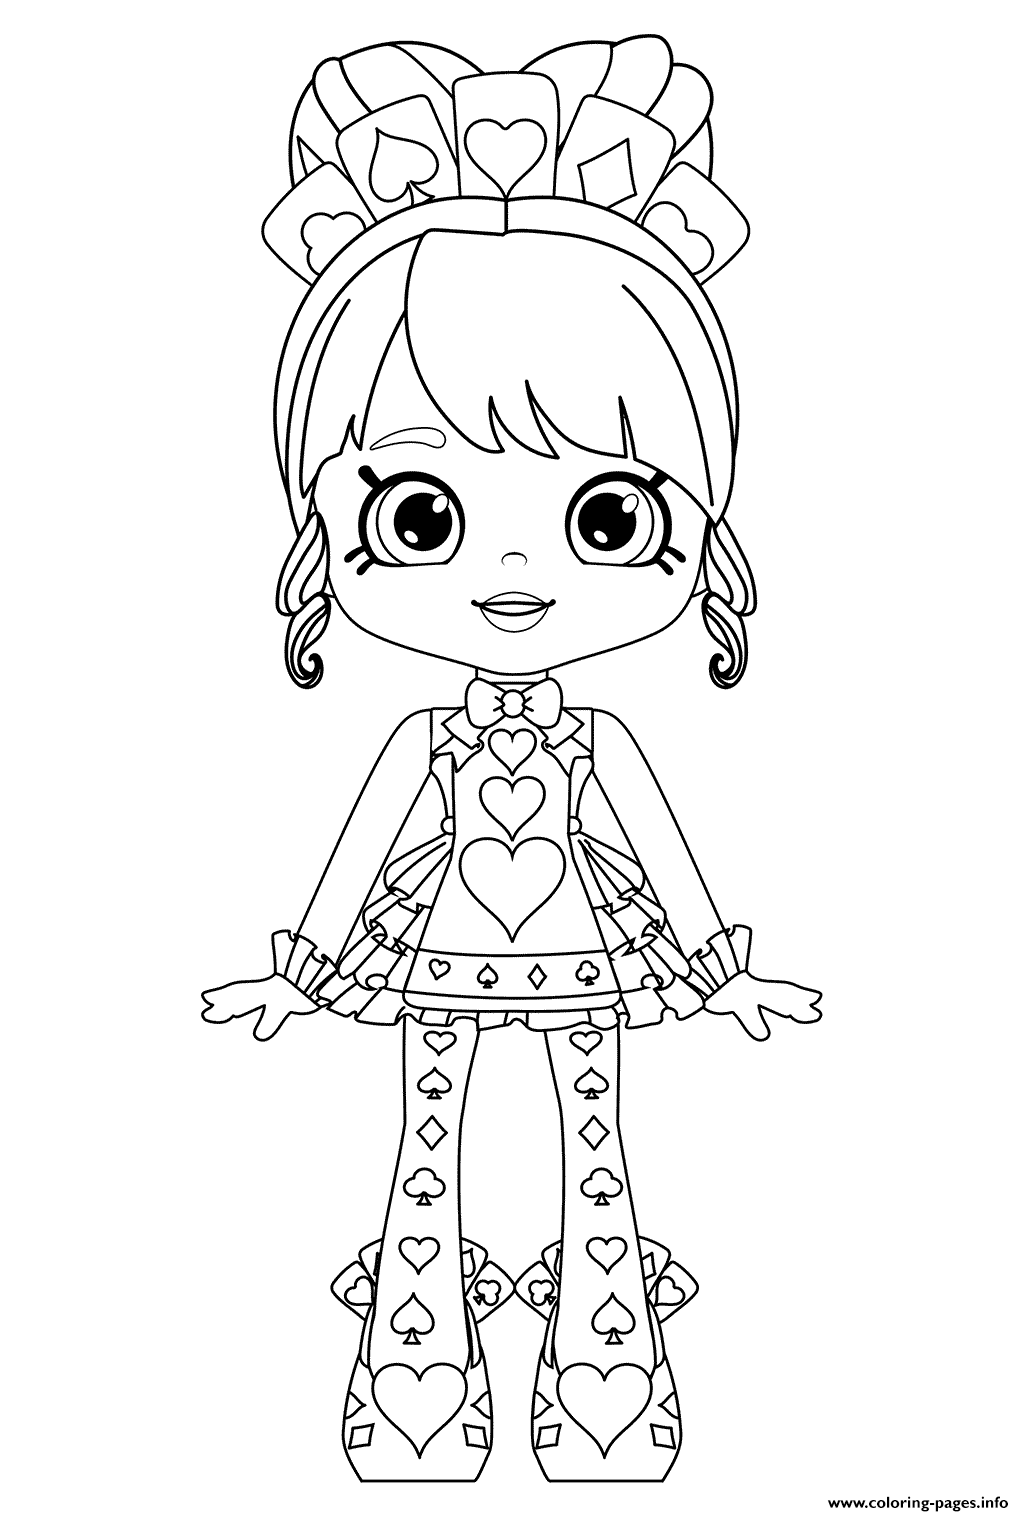 Shopkins Shoppies Coloring Pages Shoppies is a shopkins doll line